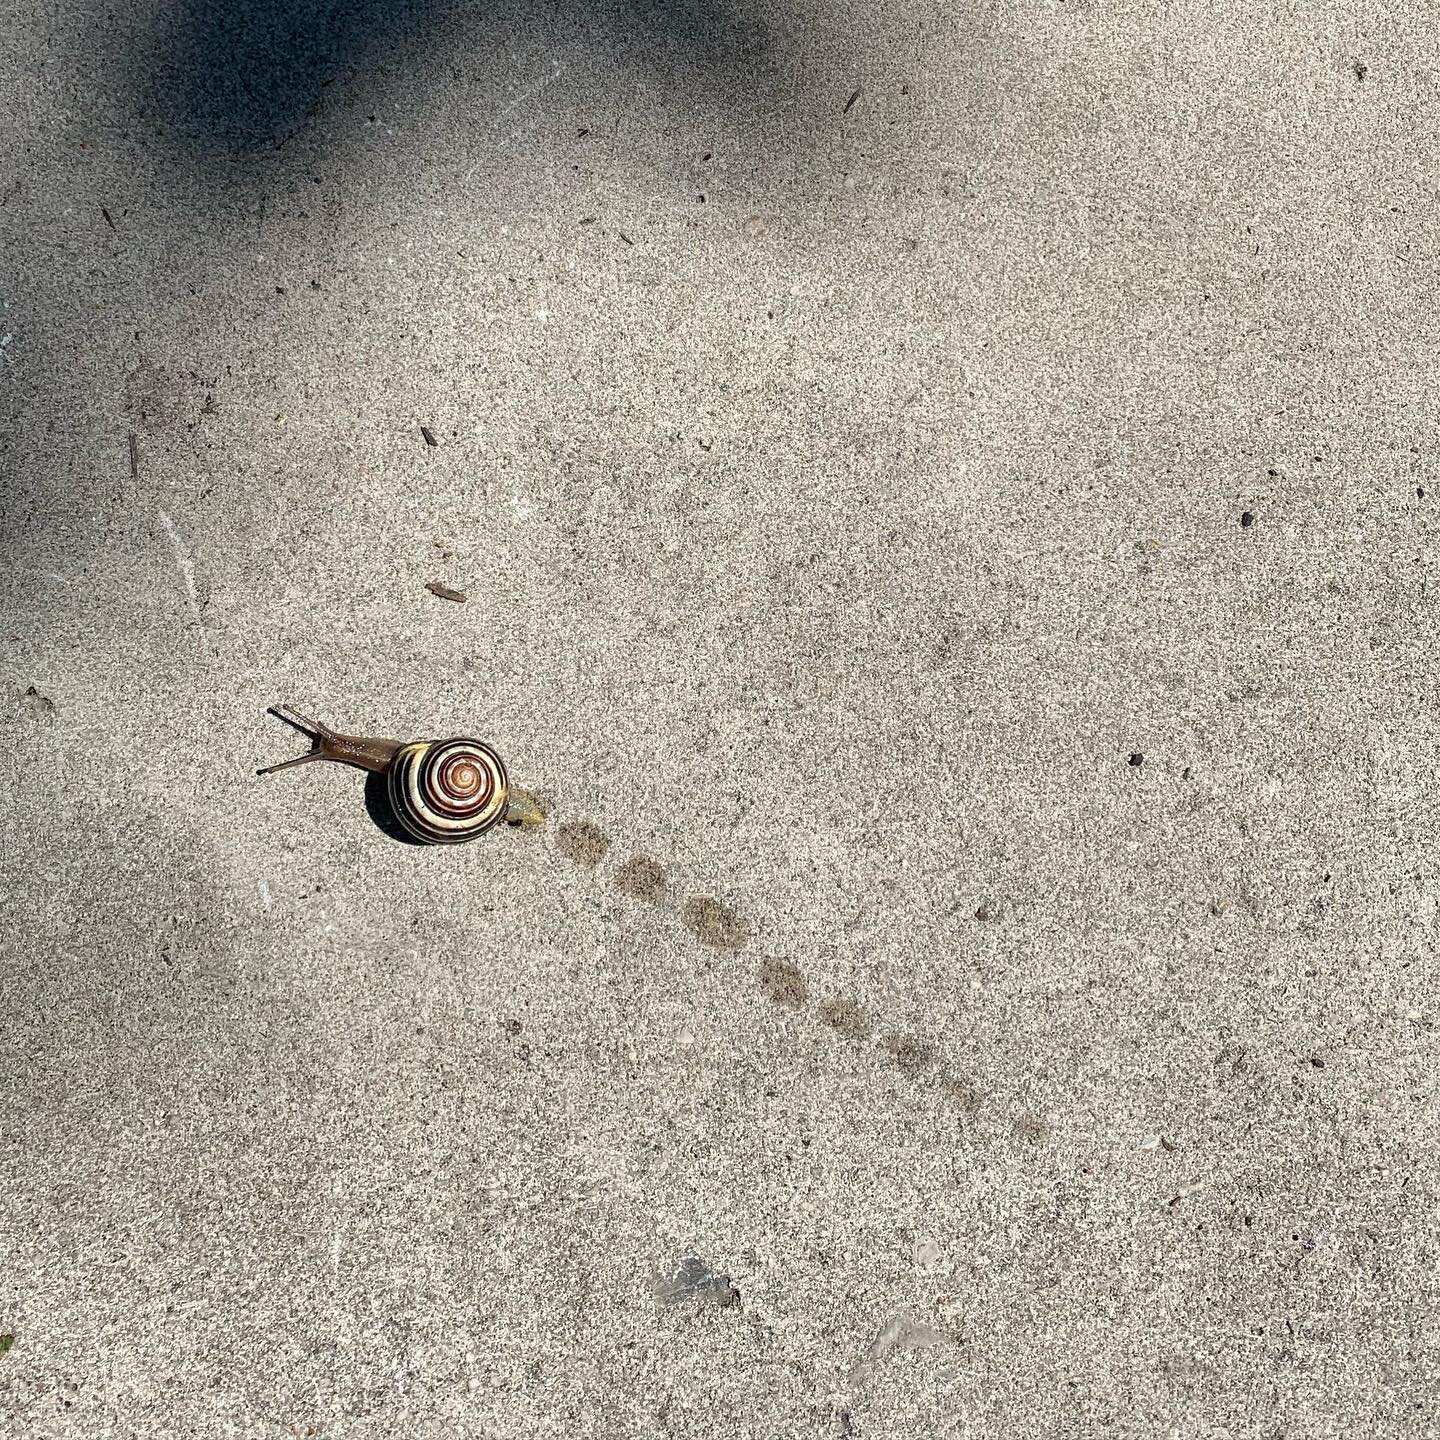 maybe he&rsquo;s going home to his snail family?
&bull;
#somegoodnews #goodnewsmovement #snail #snails